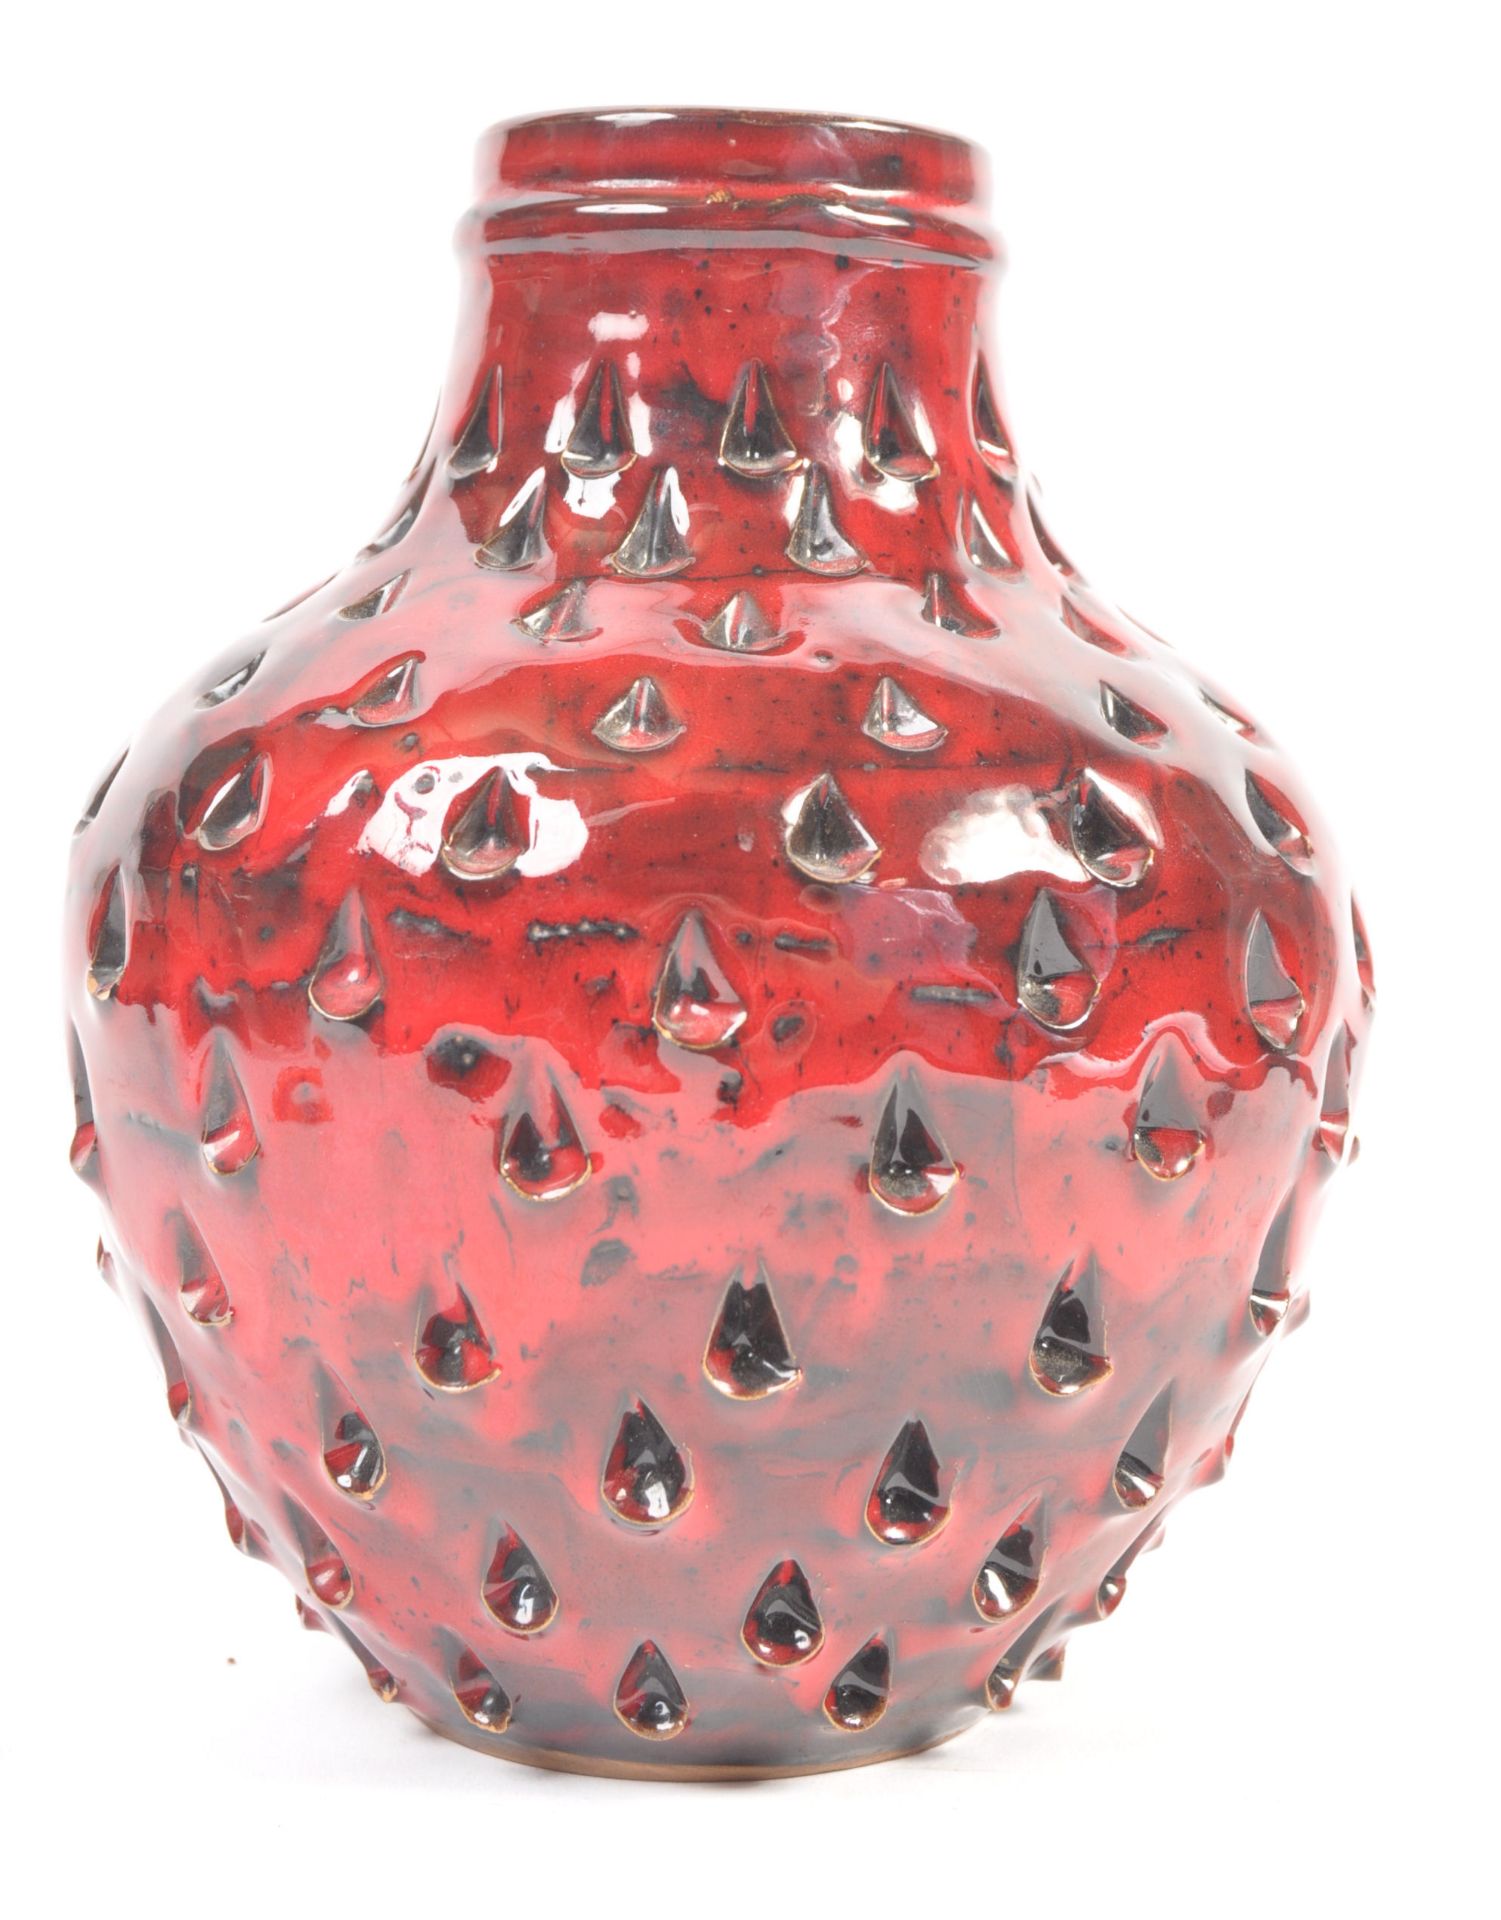 BELIEVED FRATELLI FANCIULLACCI 1960'S POTTERY STRAWBERRY VASE - Image 2 of 5